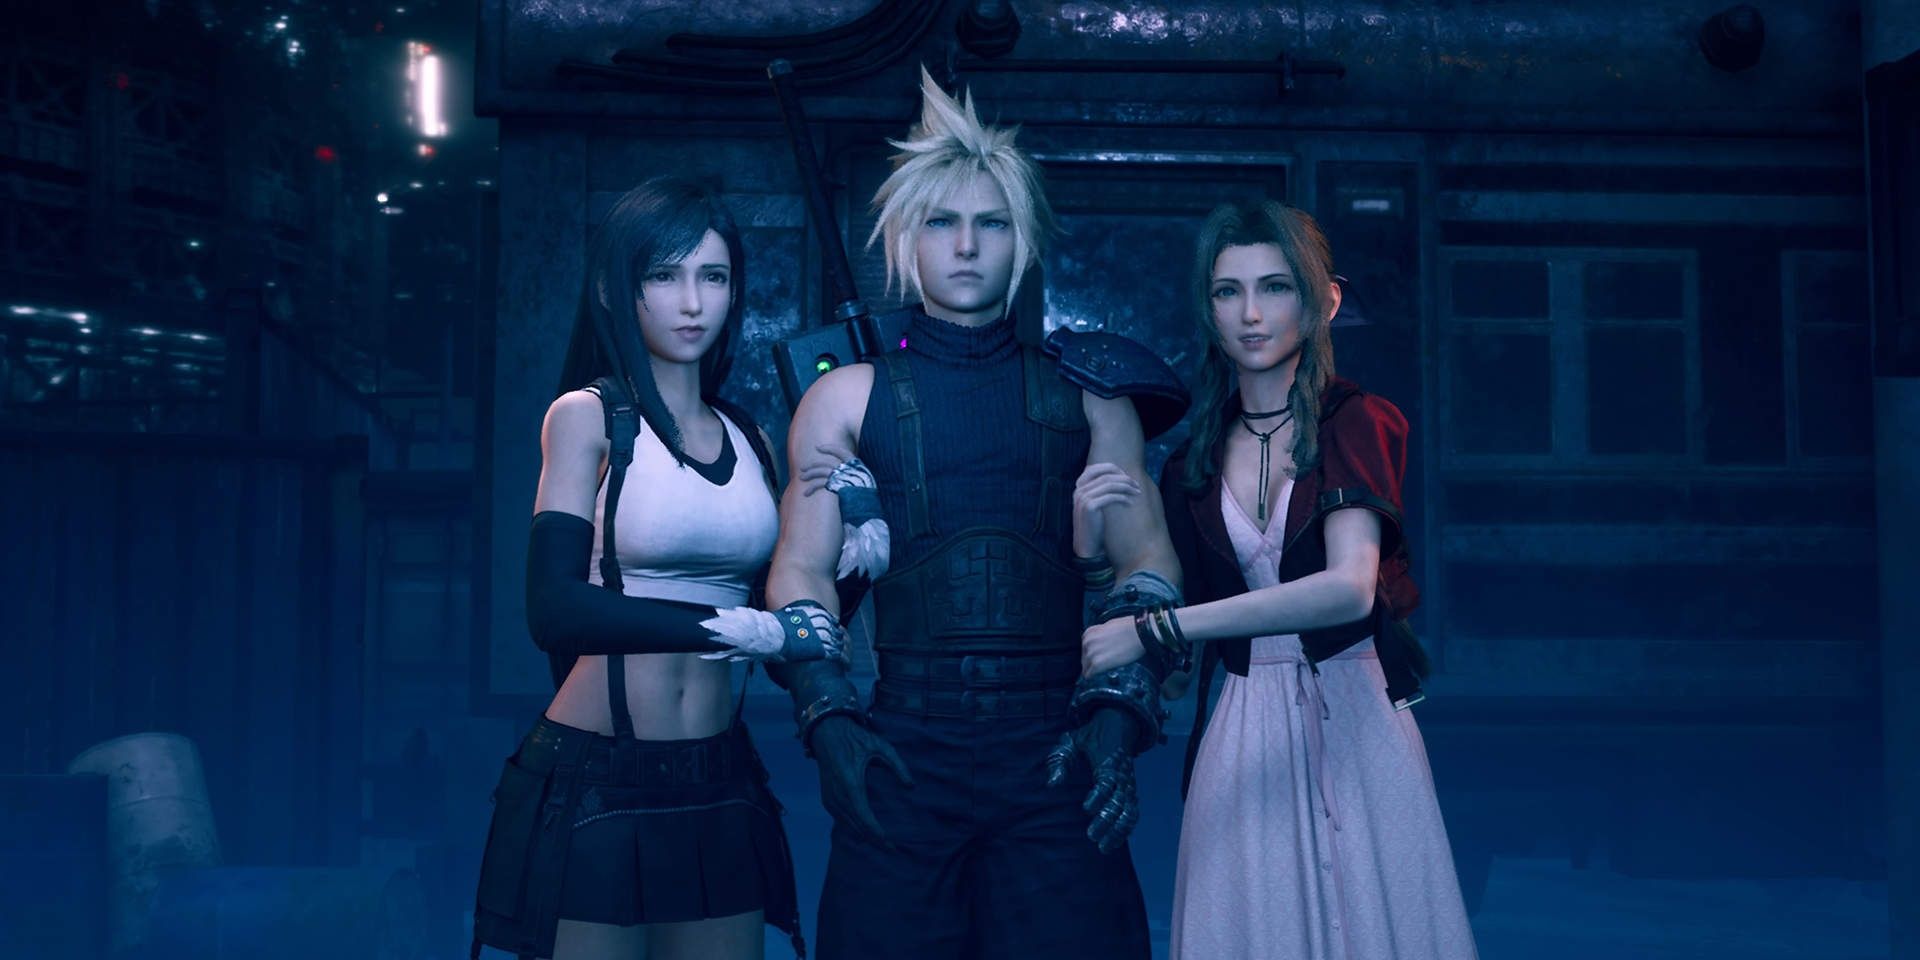 Final Fantasy 7 Remake Tifa and Aerith holding onto each of Cloud's arms